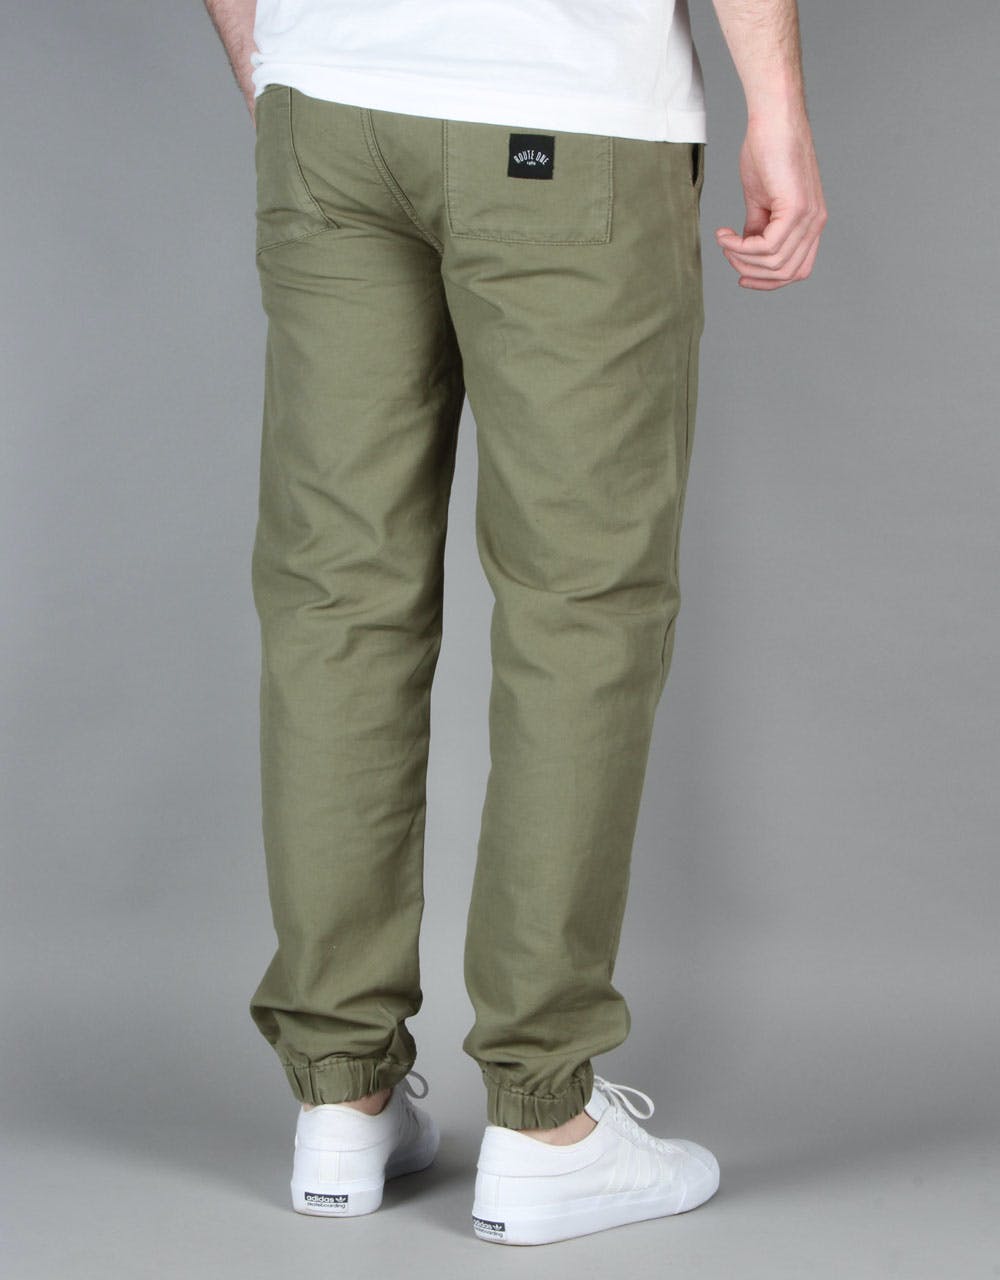 Route One Cuffed Chinos - Olive